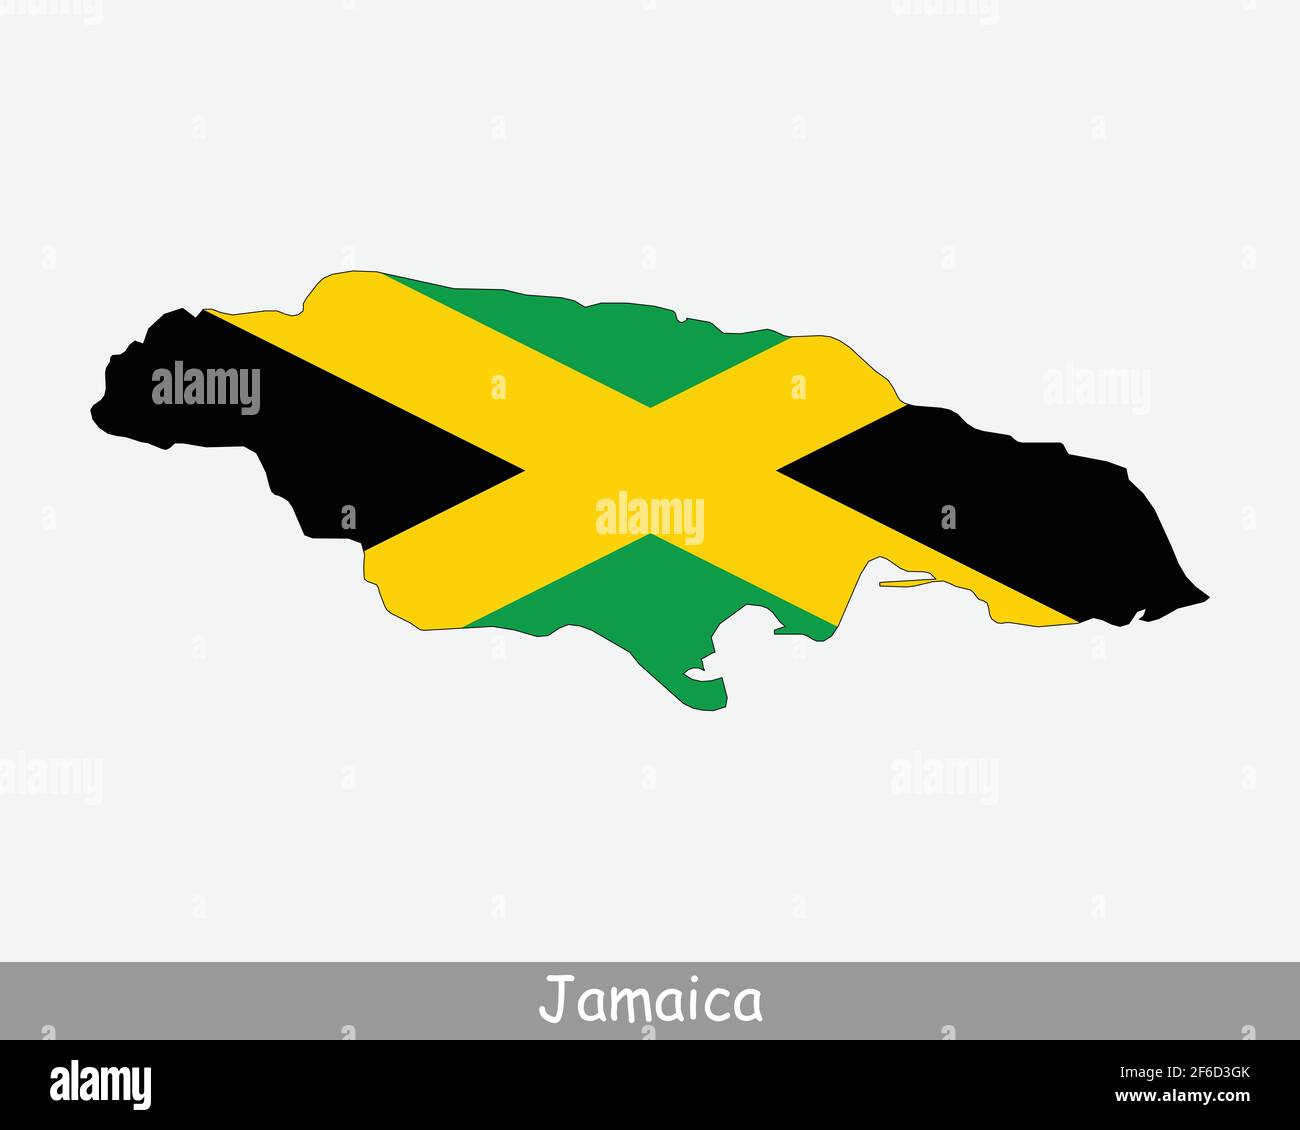 Jamaica Map Flag. Map of Jamaica with the Jamaican national flag isolated on white background. Vector Illustration. Stock Vector